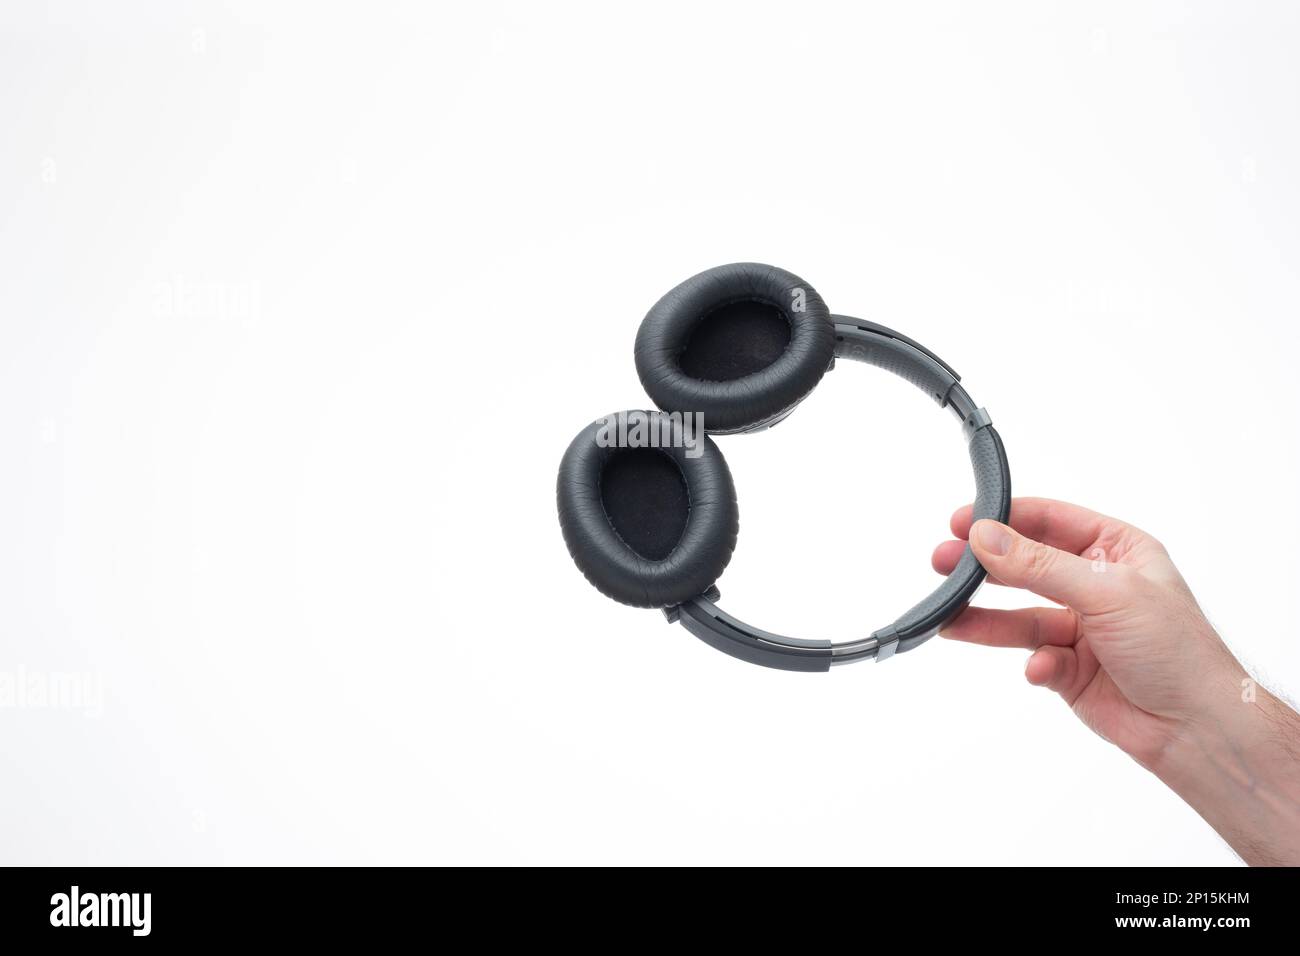 Generic wireless over the ear headphone held in hand by Caucasian male hand. Close up studio shot, isolated on white background. Stock Photo